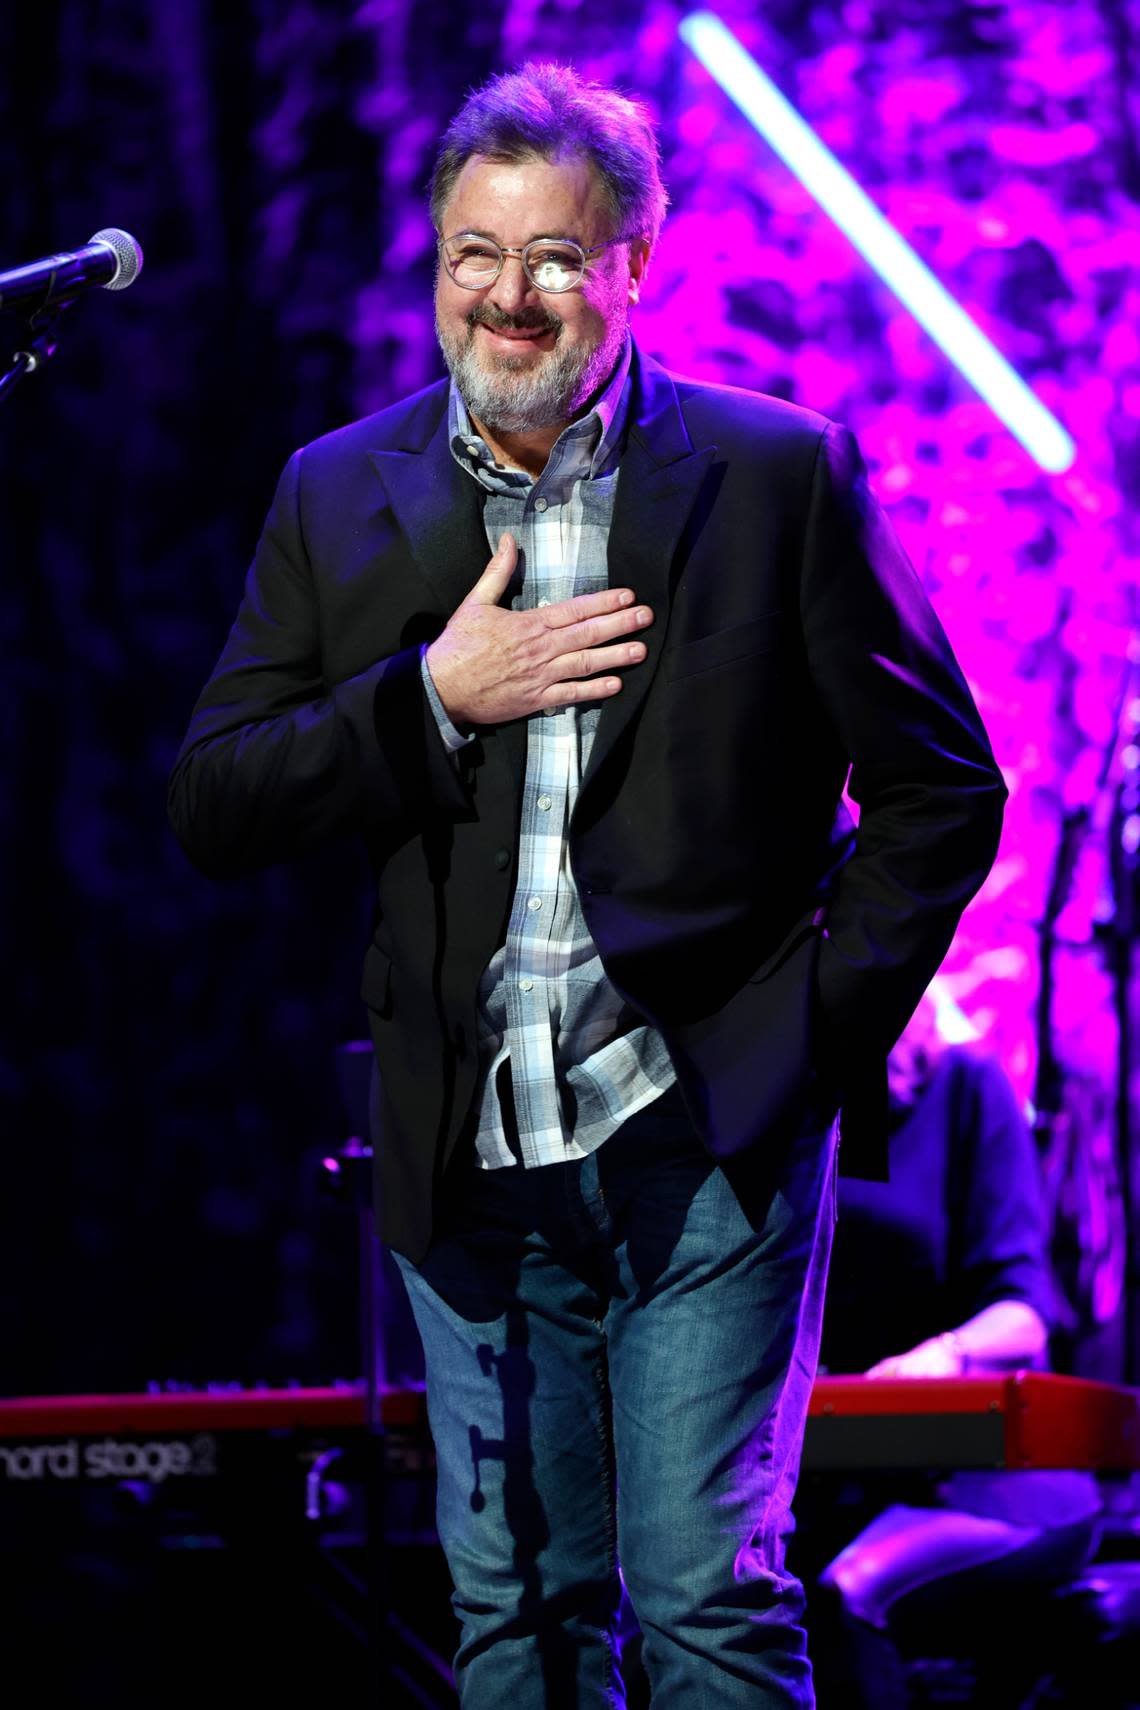 Vince Gill made his career in country music but was no stranger to the Eagles’ music.